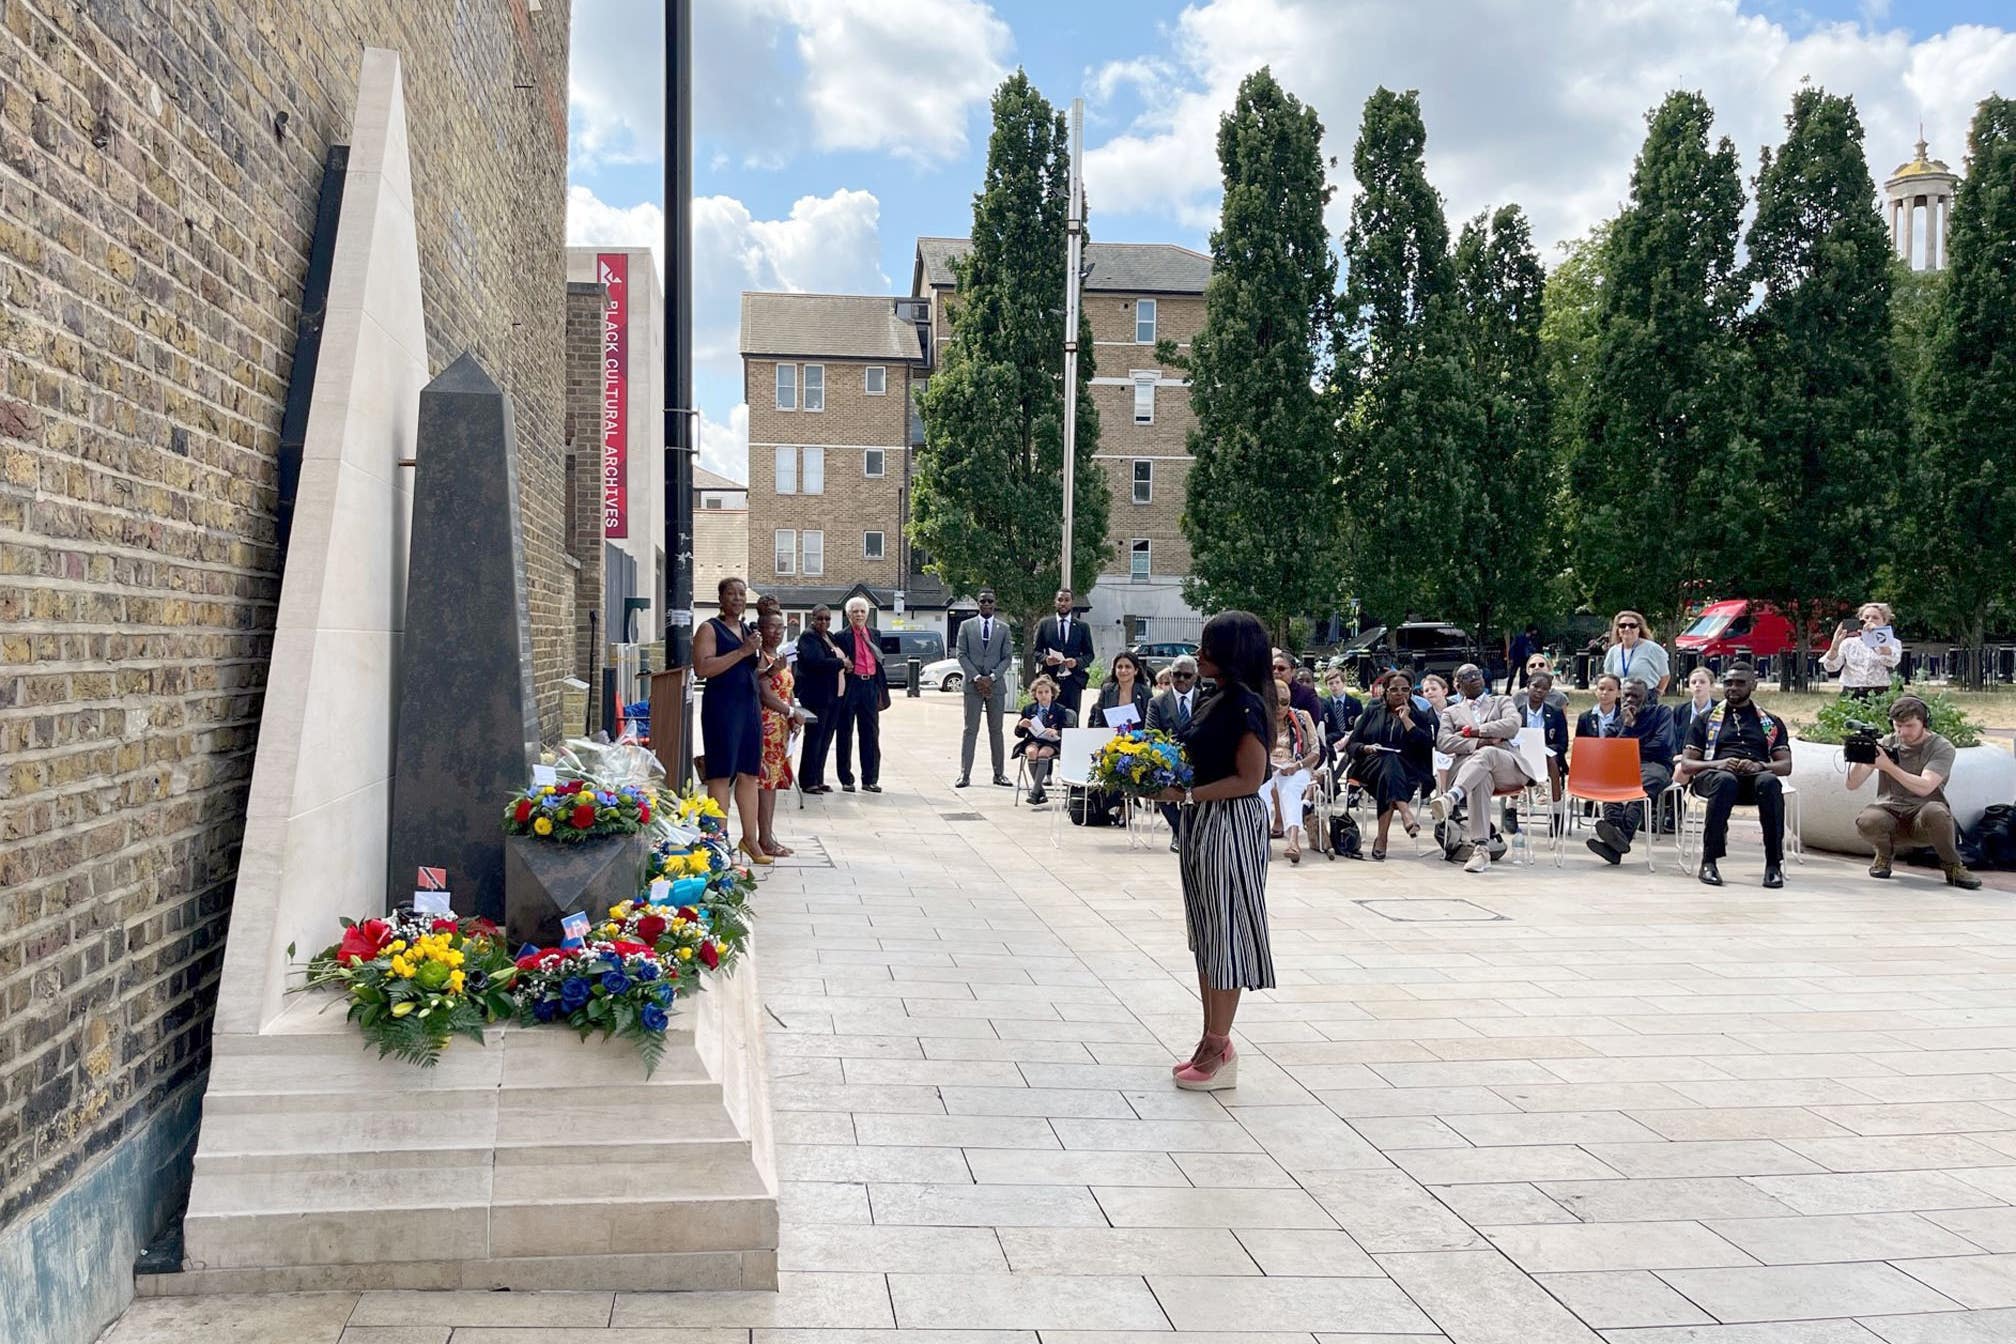 Flowers were laid at the Windrush Square memorial during the service (Harry Stedman/PA)